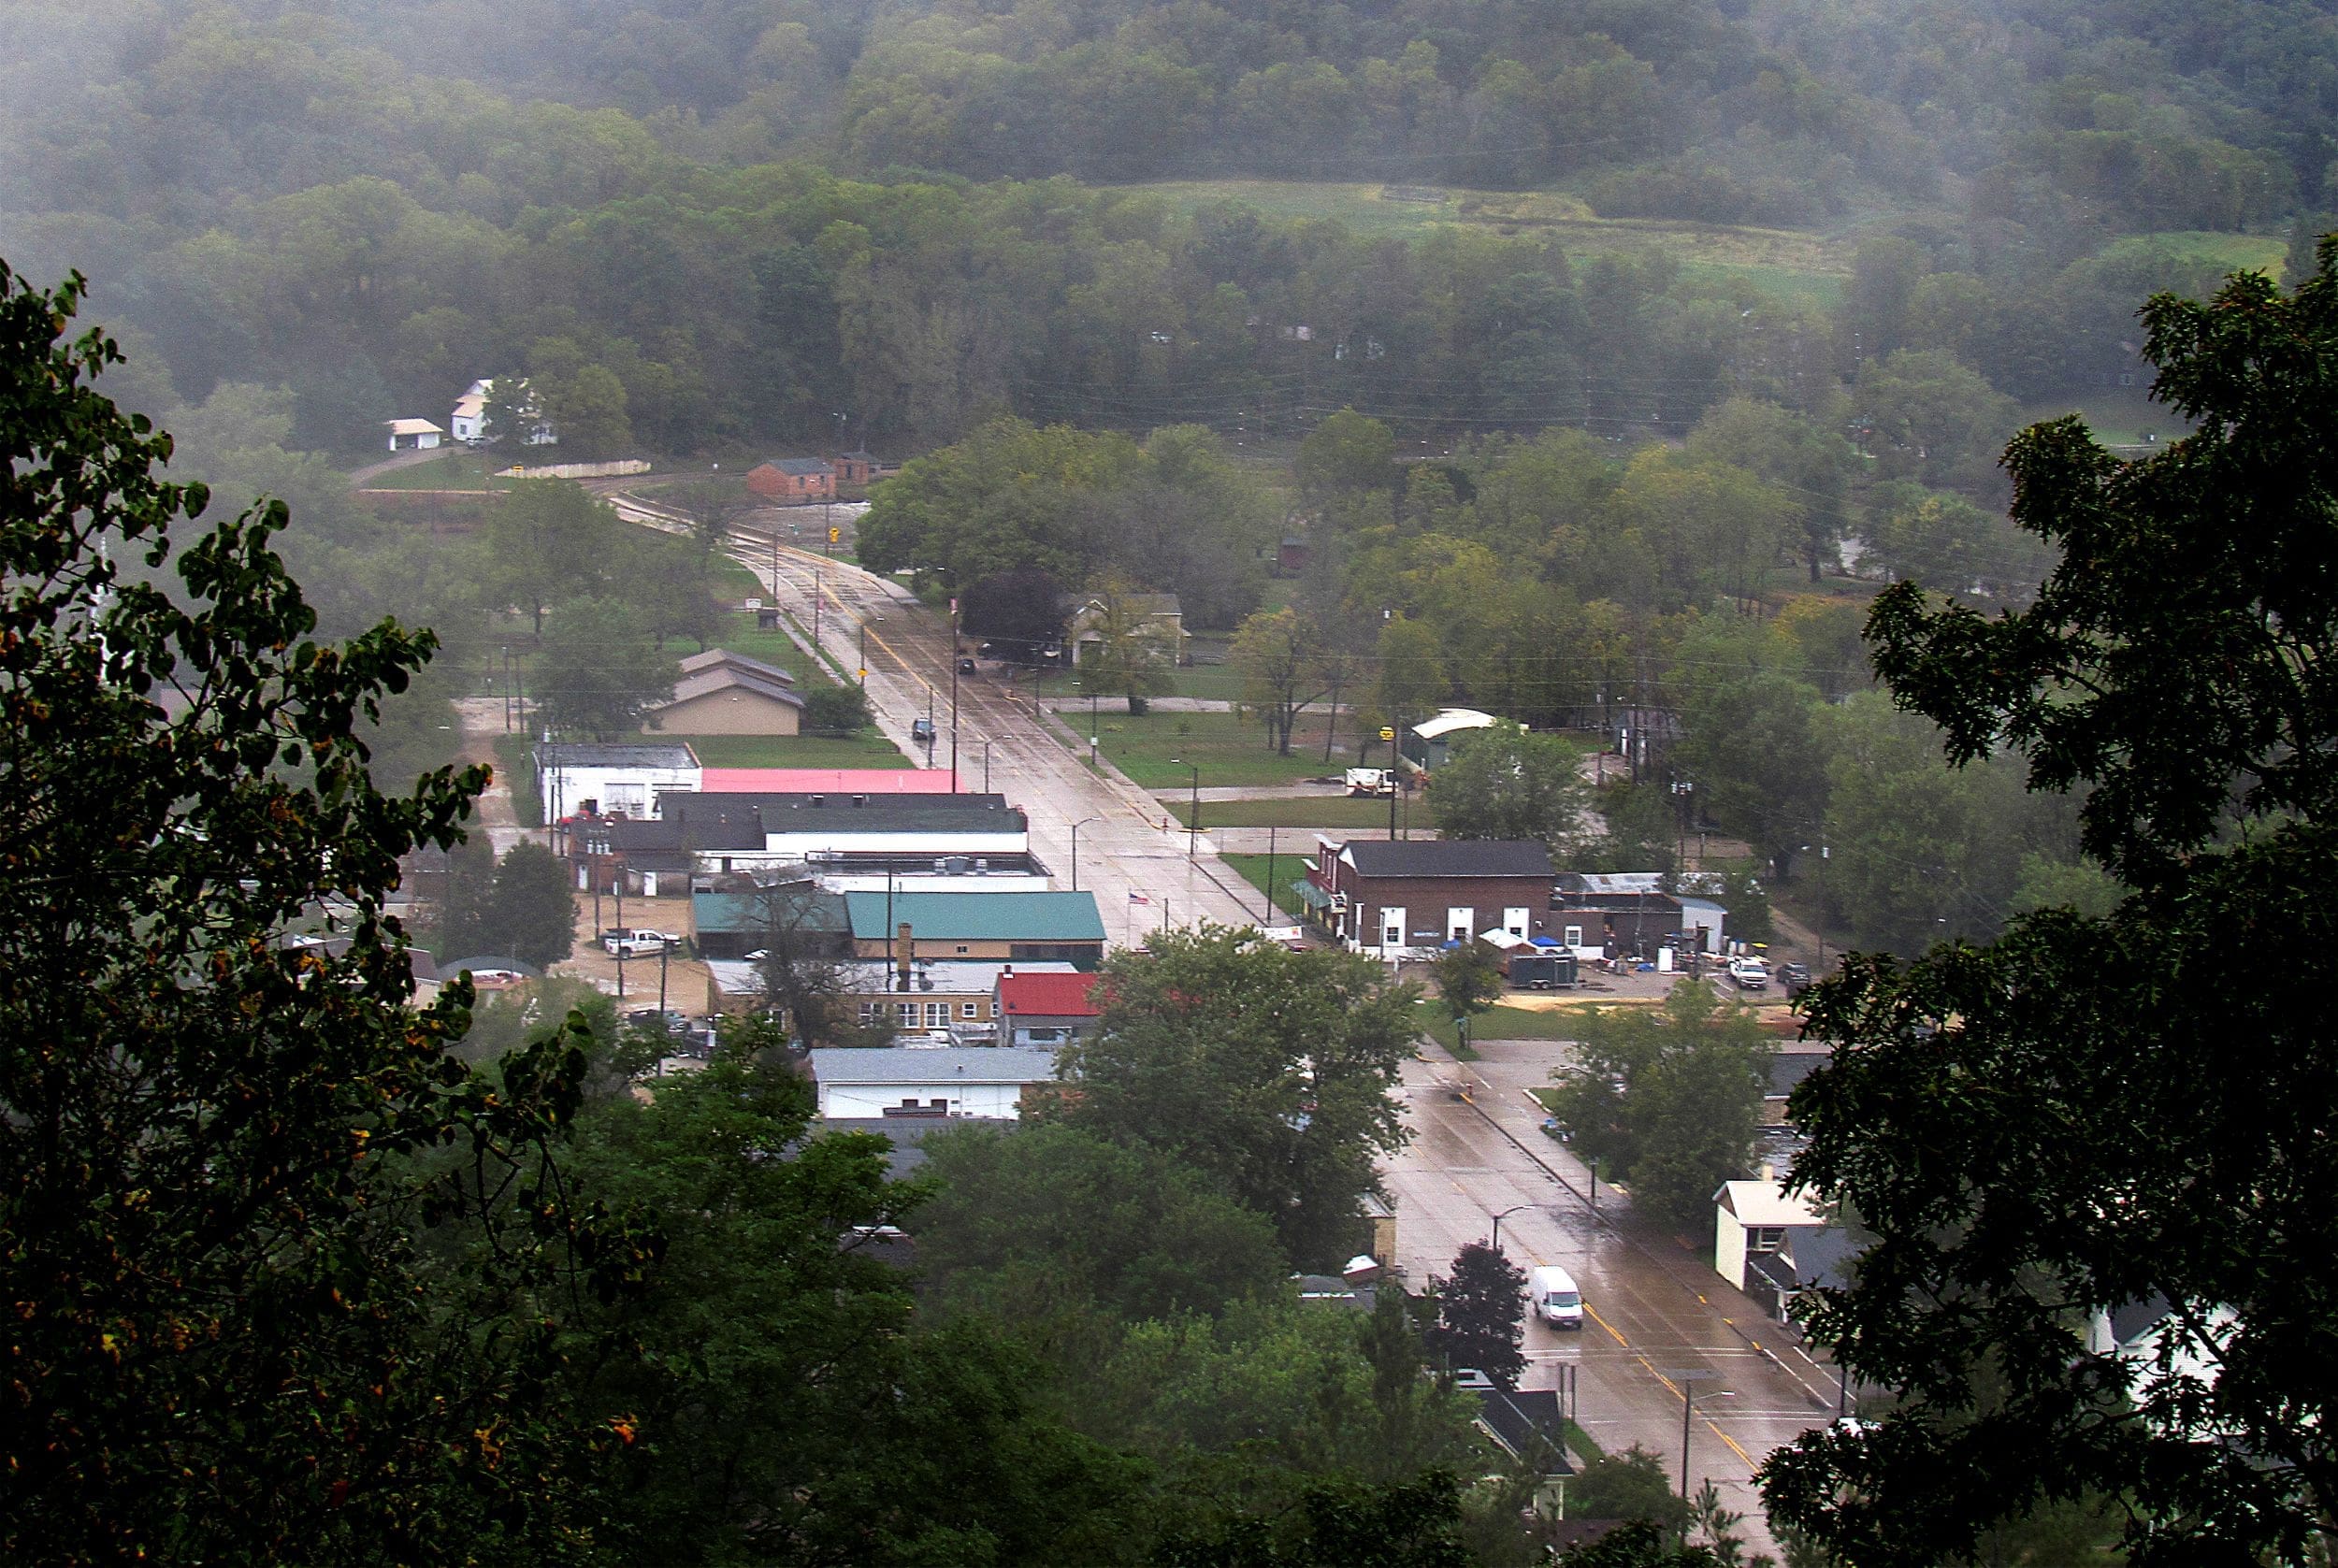 In this Tuesday, Sept. 18, 2018 photo, a scenic overlook along Highway 171 provides a view of downtown Gays Mills, Wis., which has a long history of flooding from the Kickapoo River.